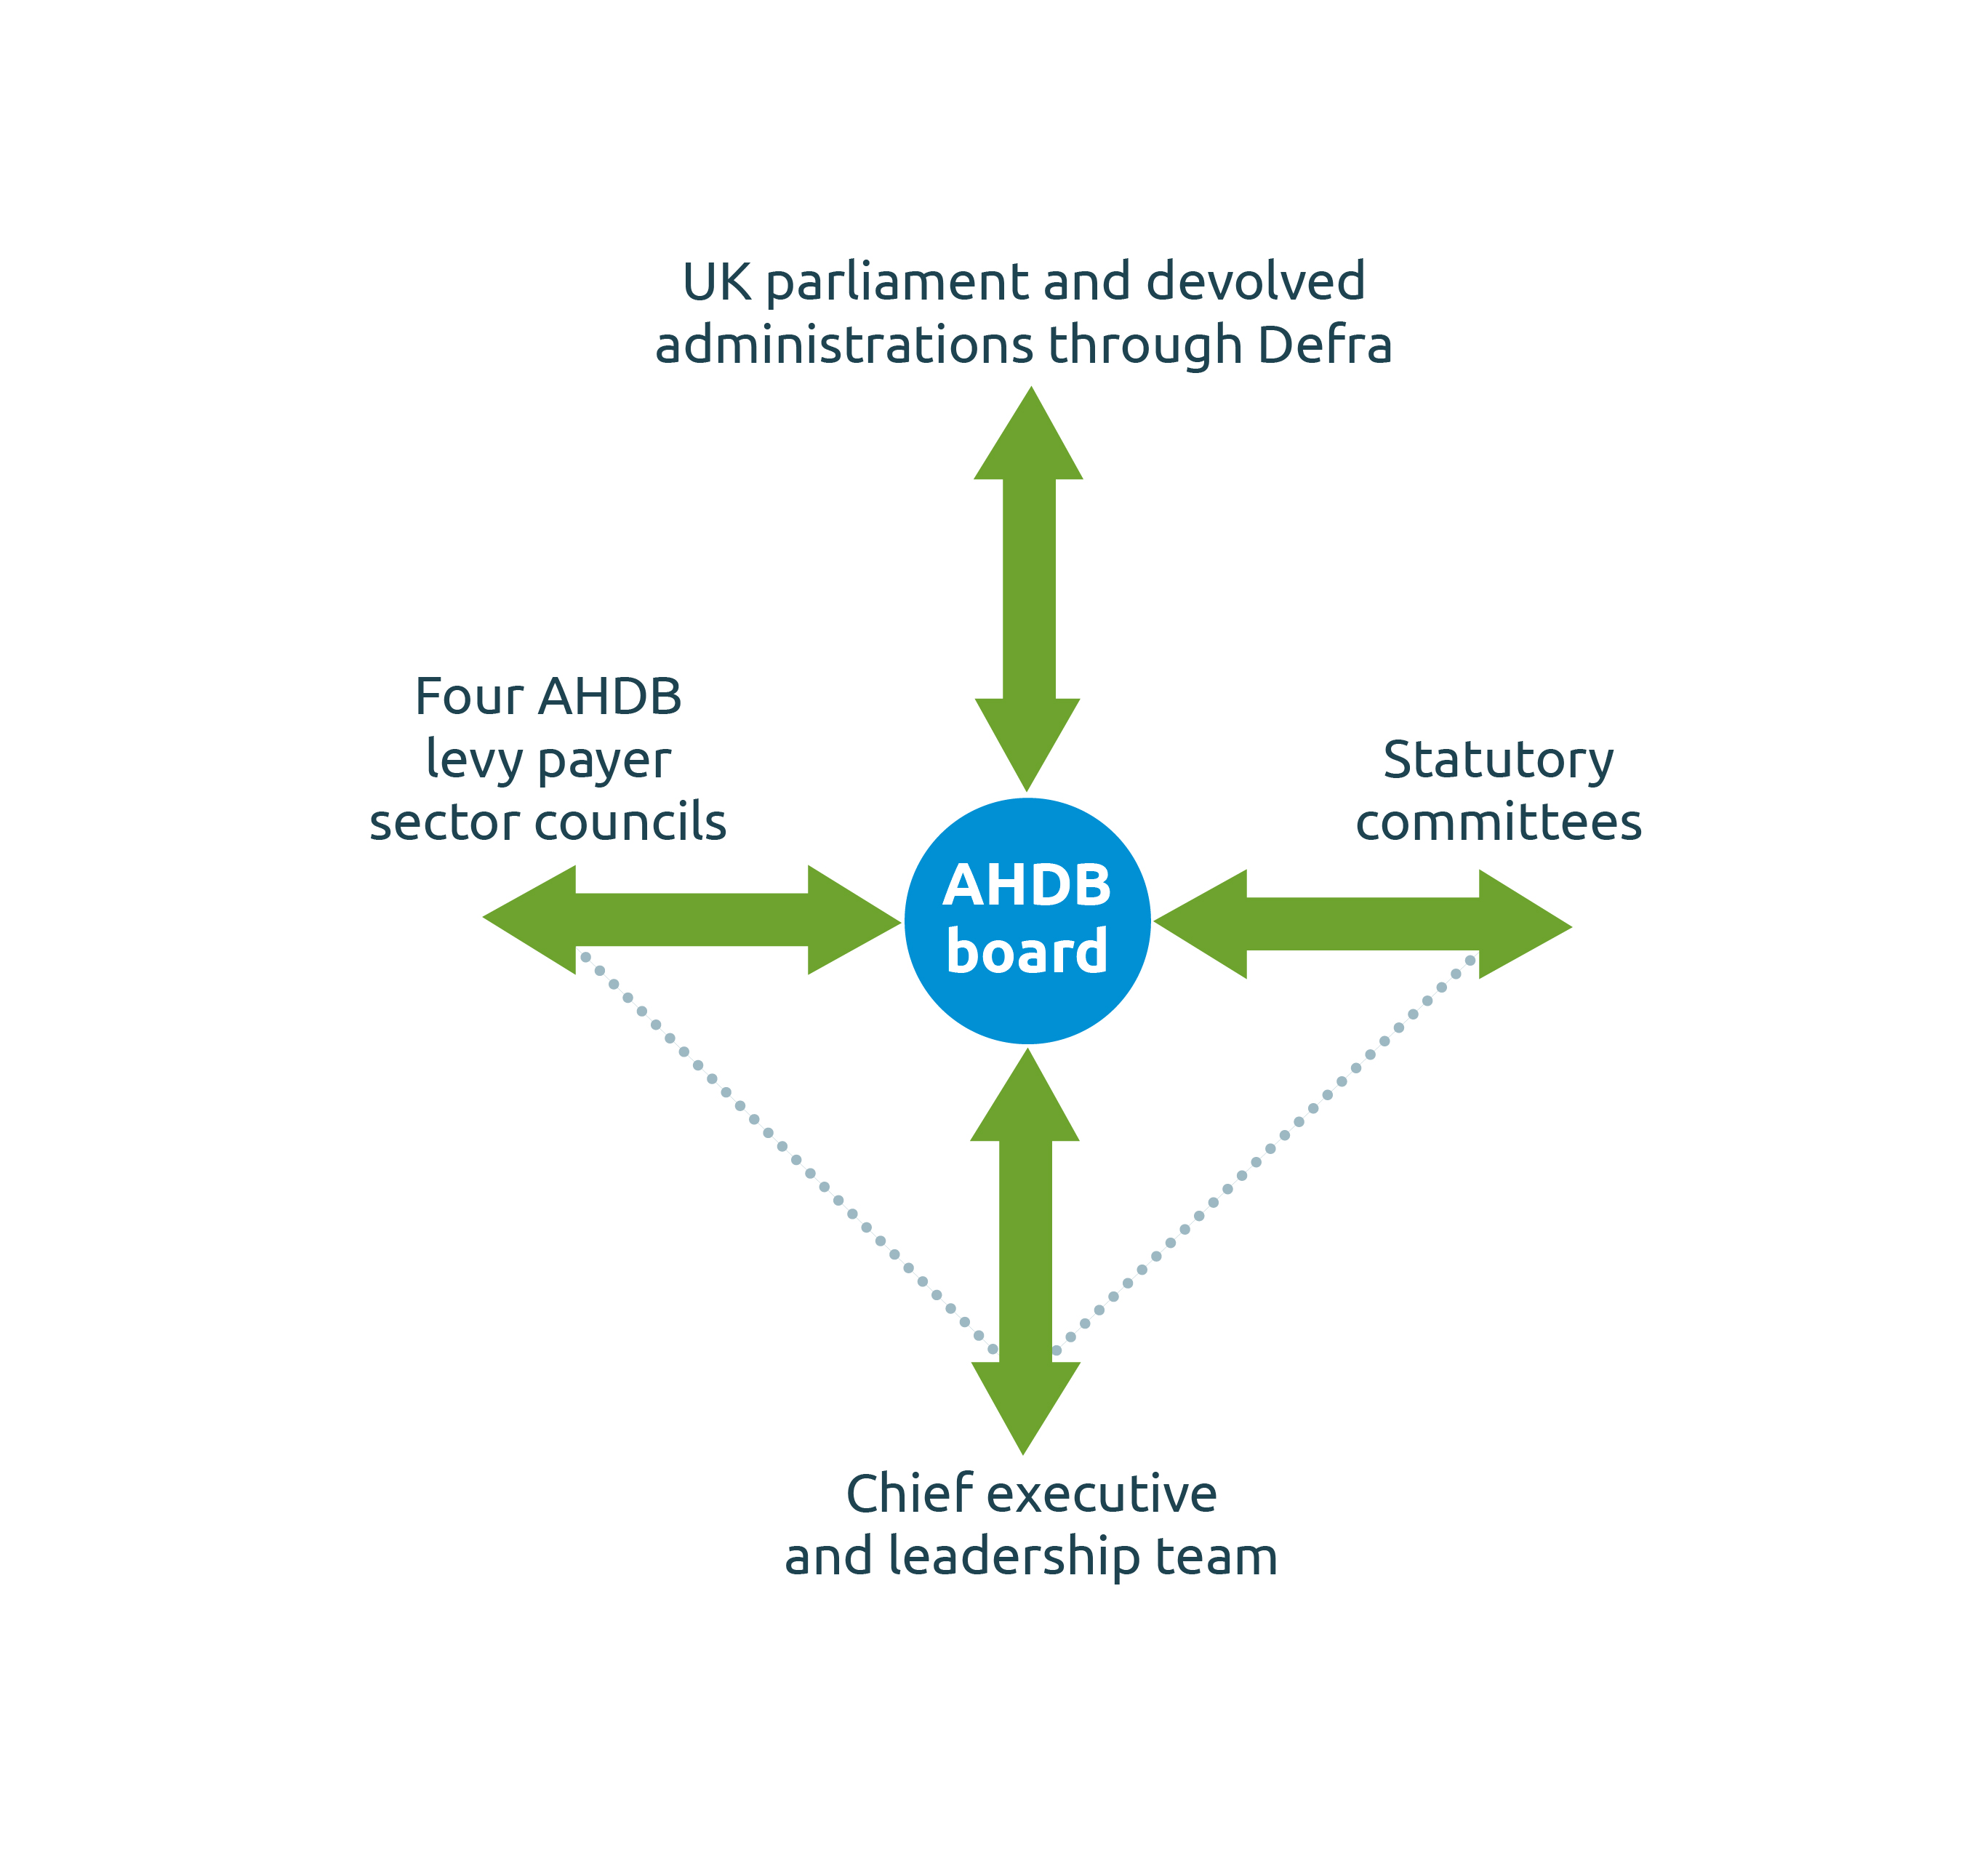 Diagram showing work of AHDB board, statutory committees, sector councils and leadership team